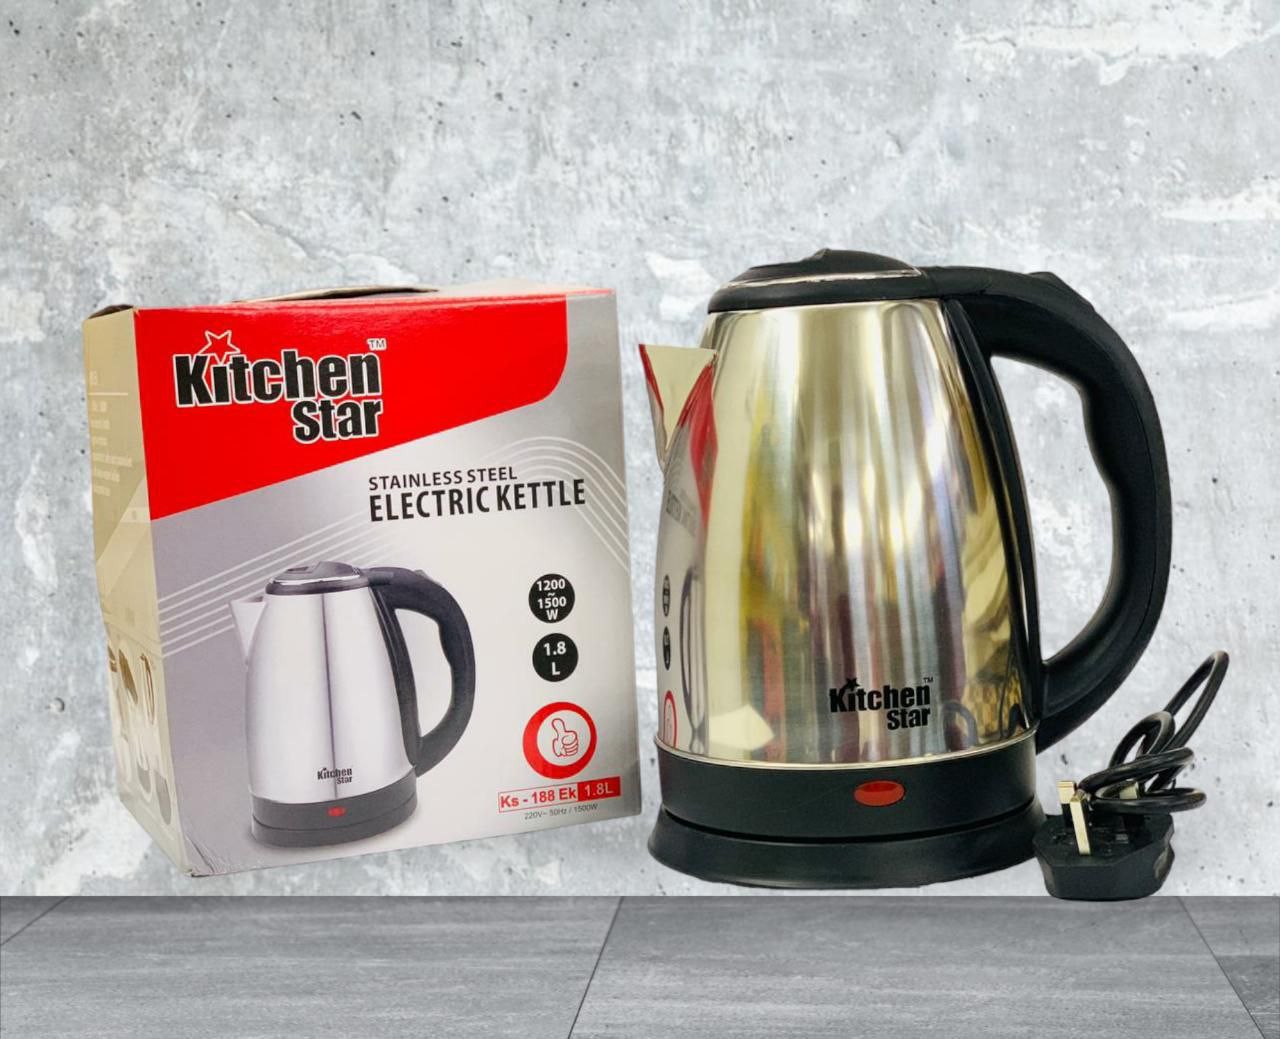 Kitchen Star Stainless Steel Electric Kettle